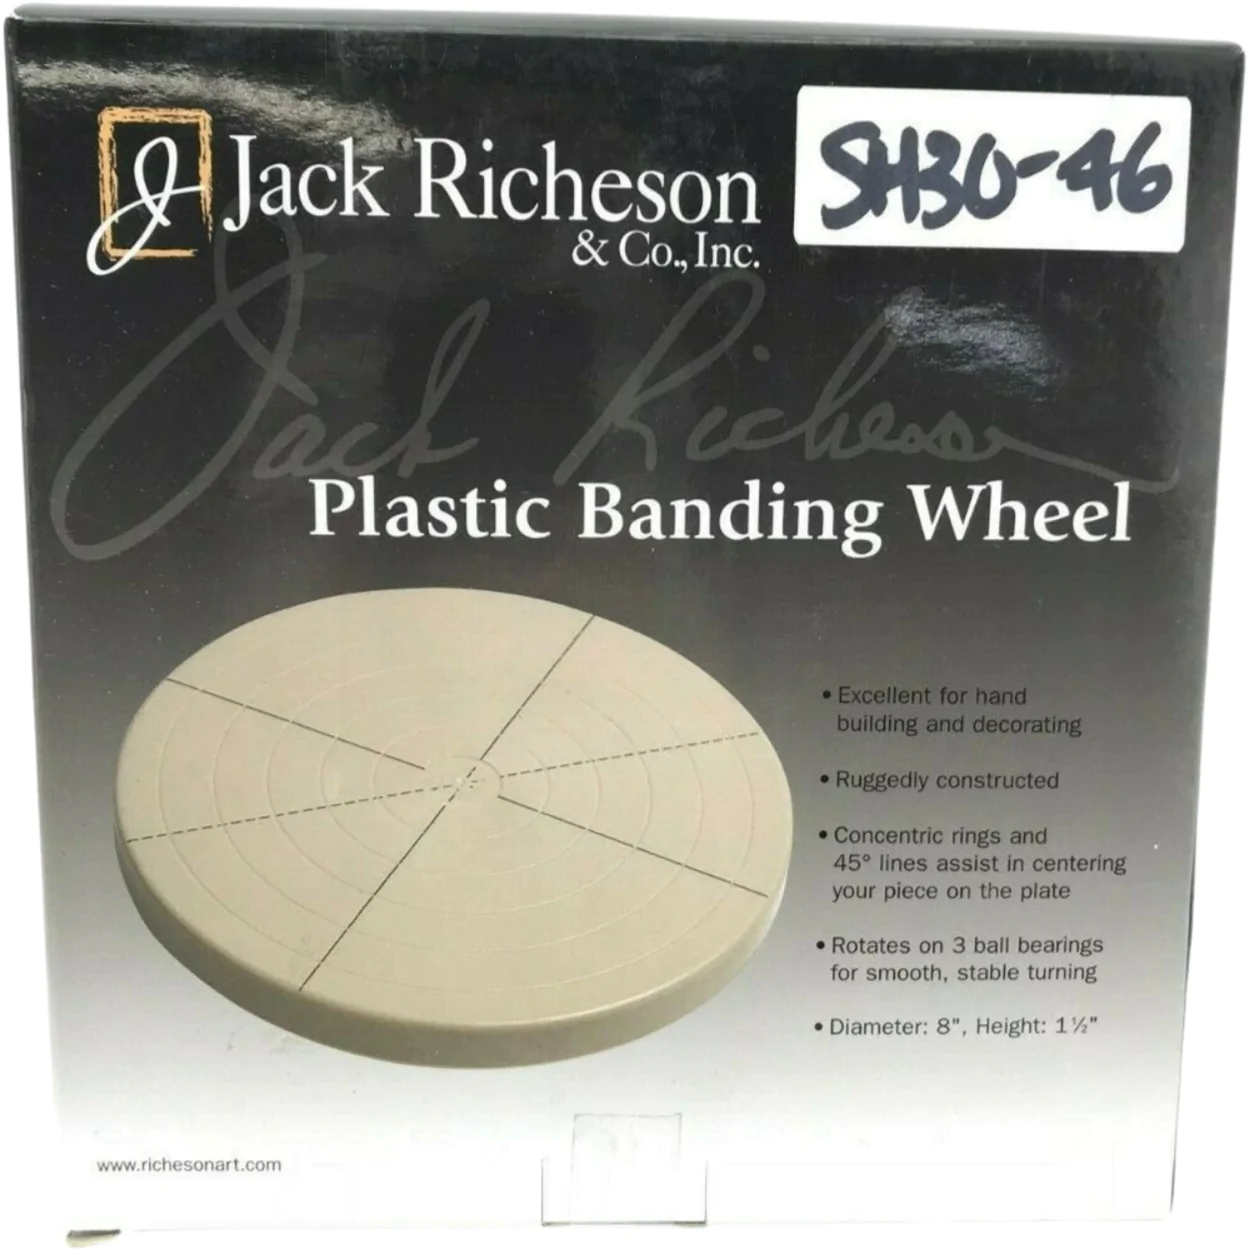 Jack Richeson Plastic Banding Wheel / Clay Crafting Wheel / Taupe